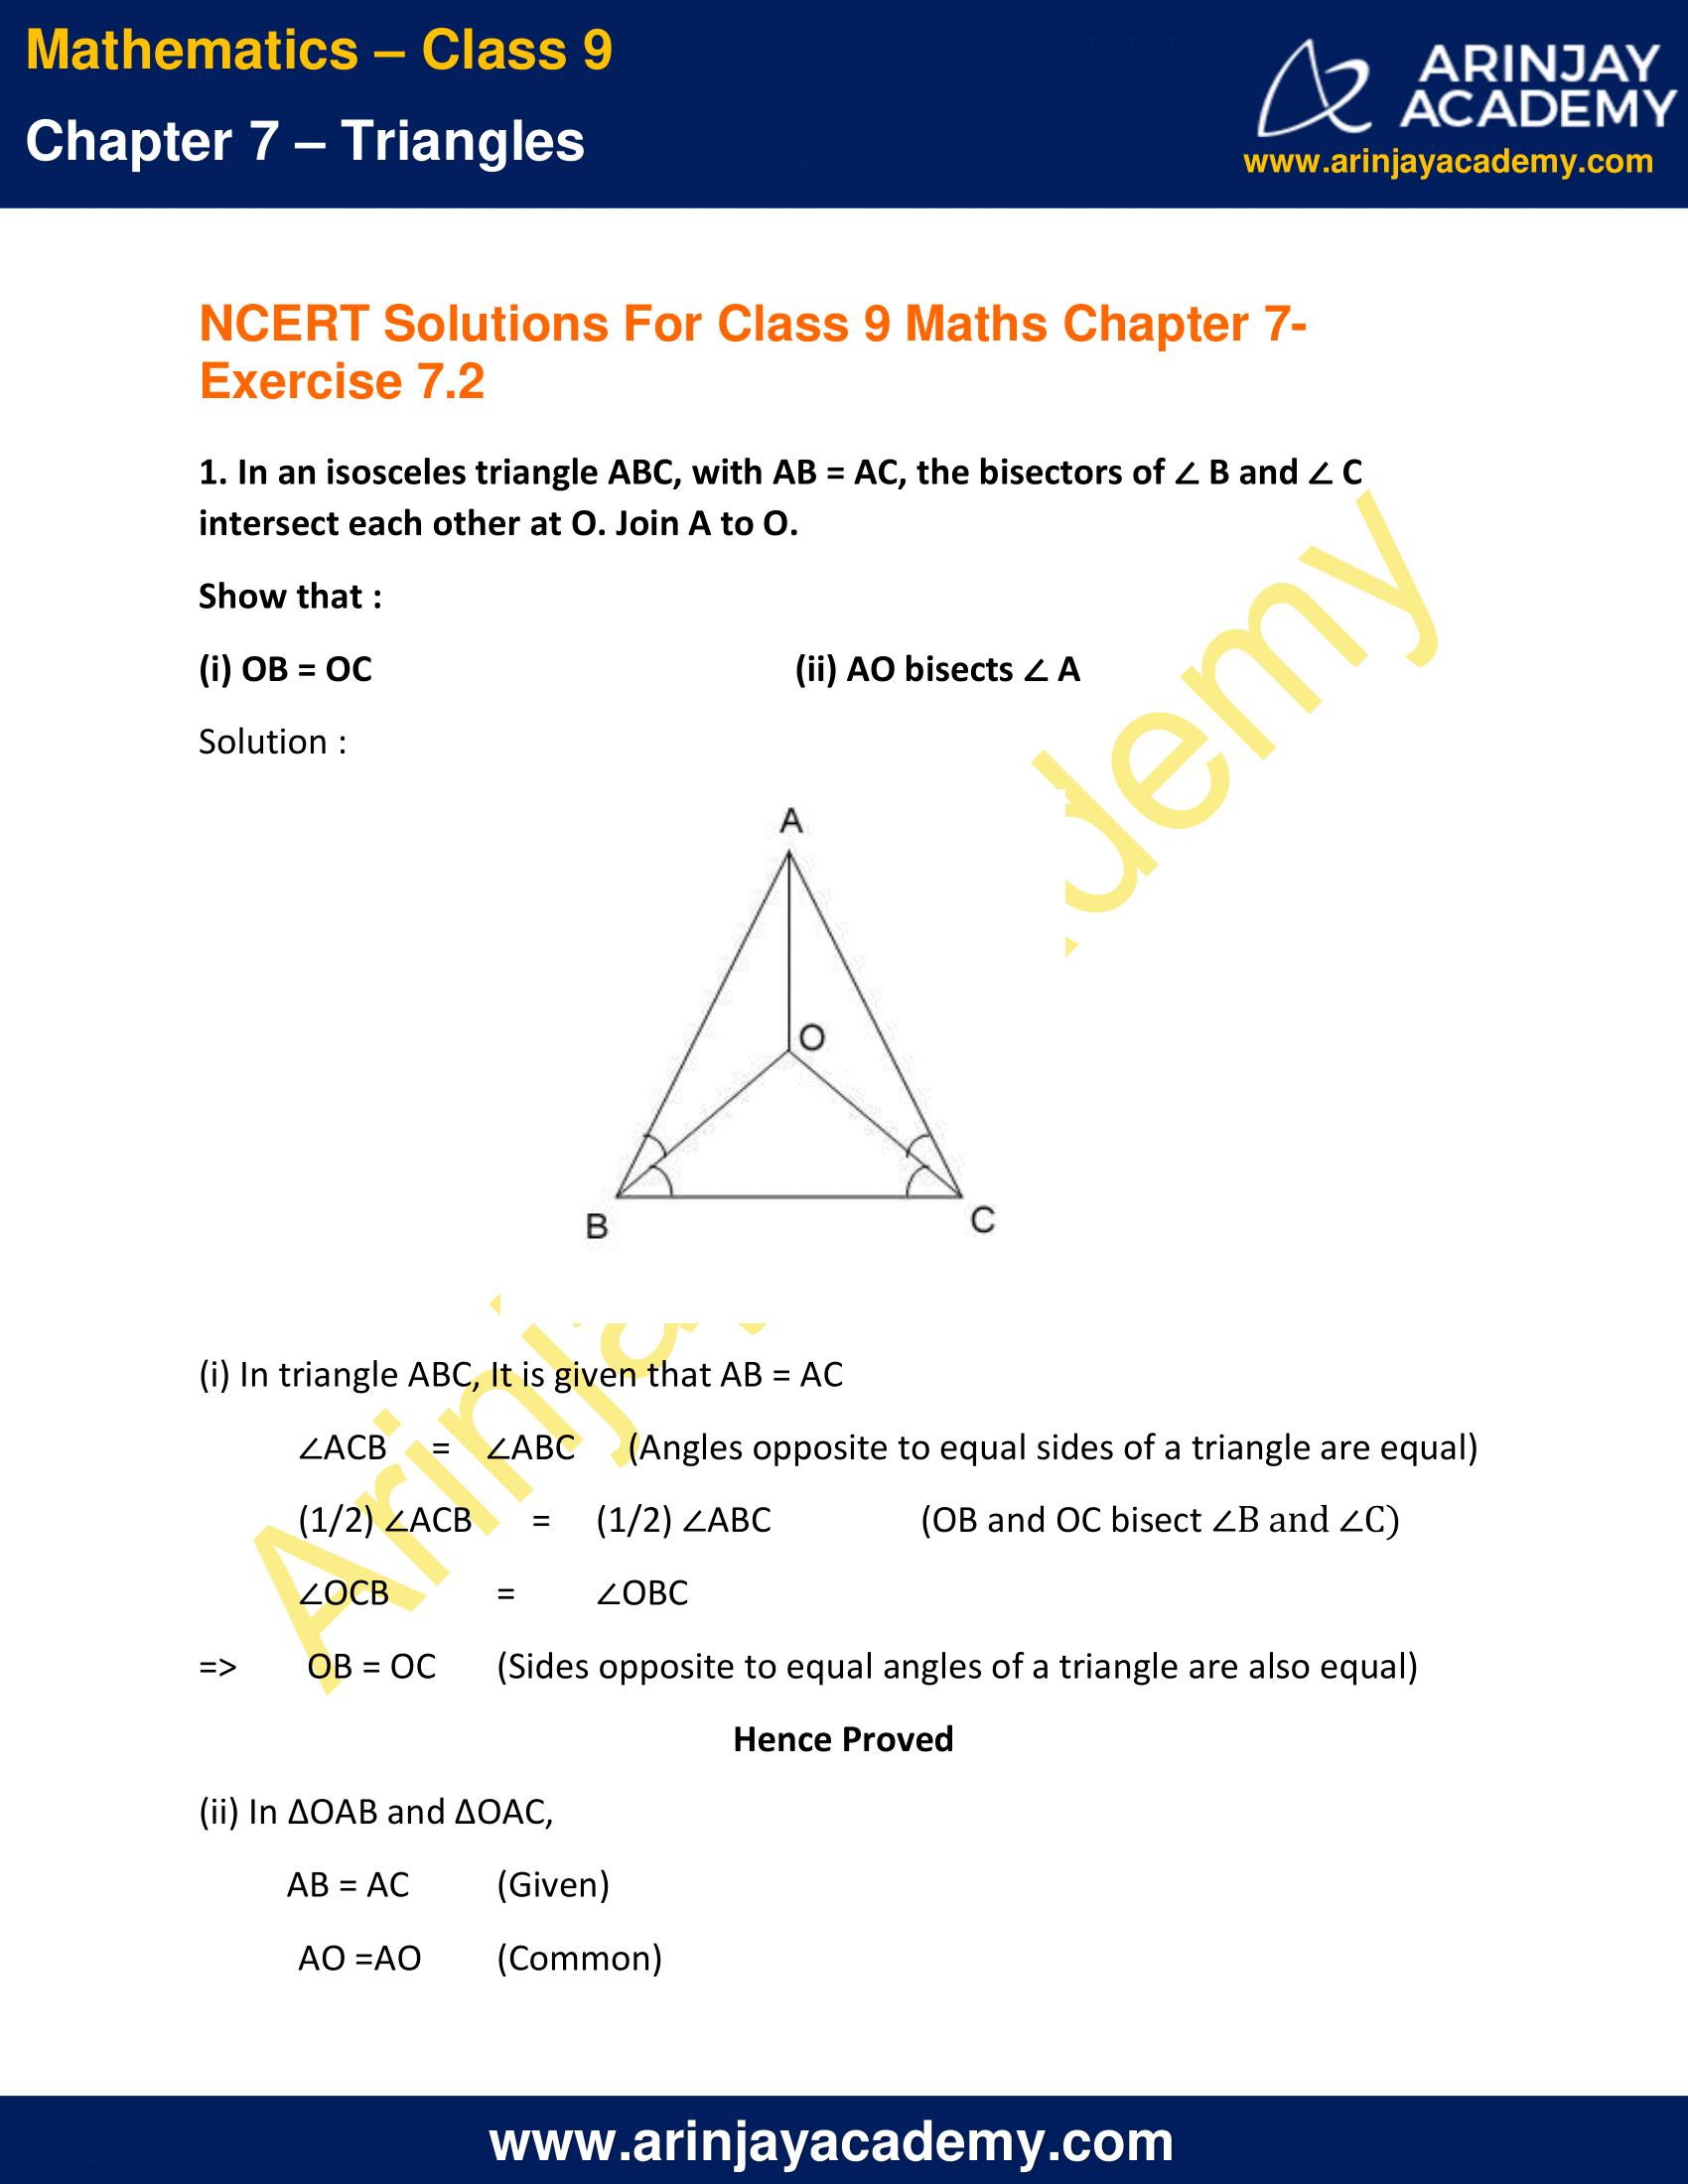 NCERT Solutions for Class 9 Maths Chapter 7 Exercise 7.2 image 1